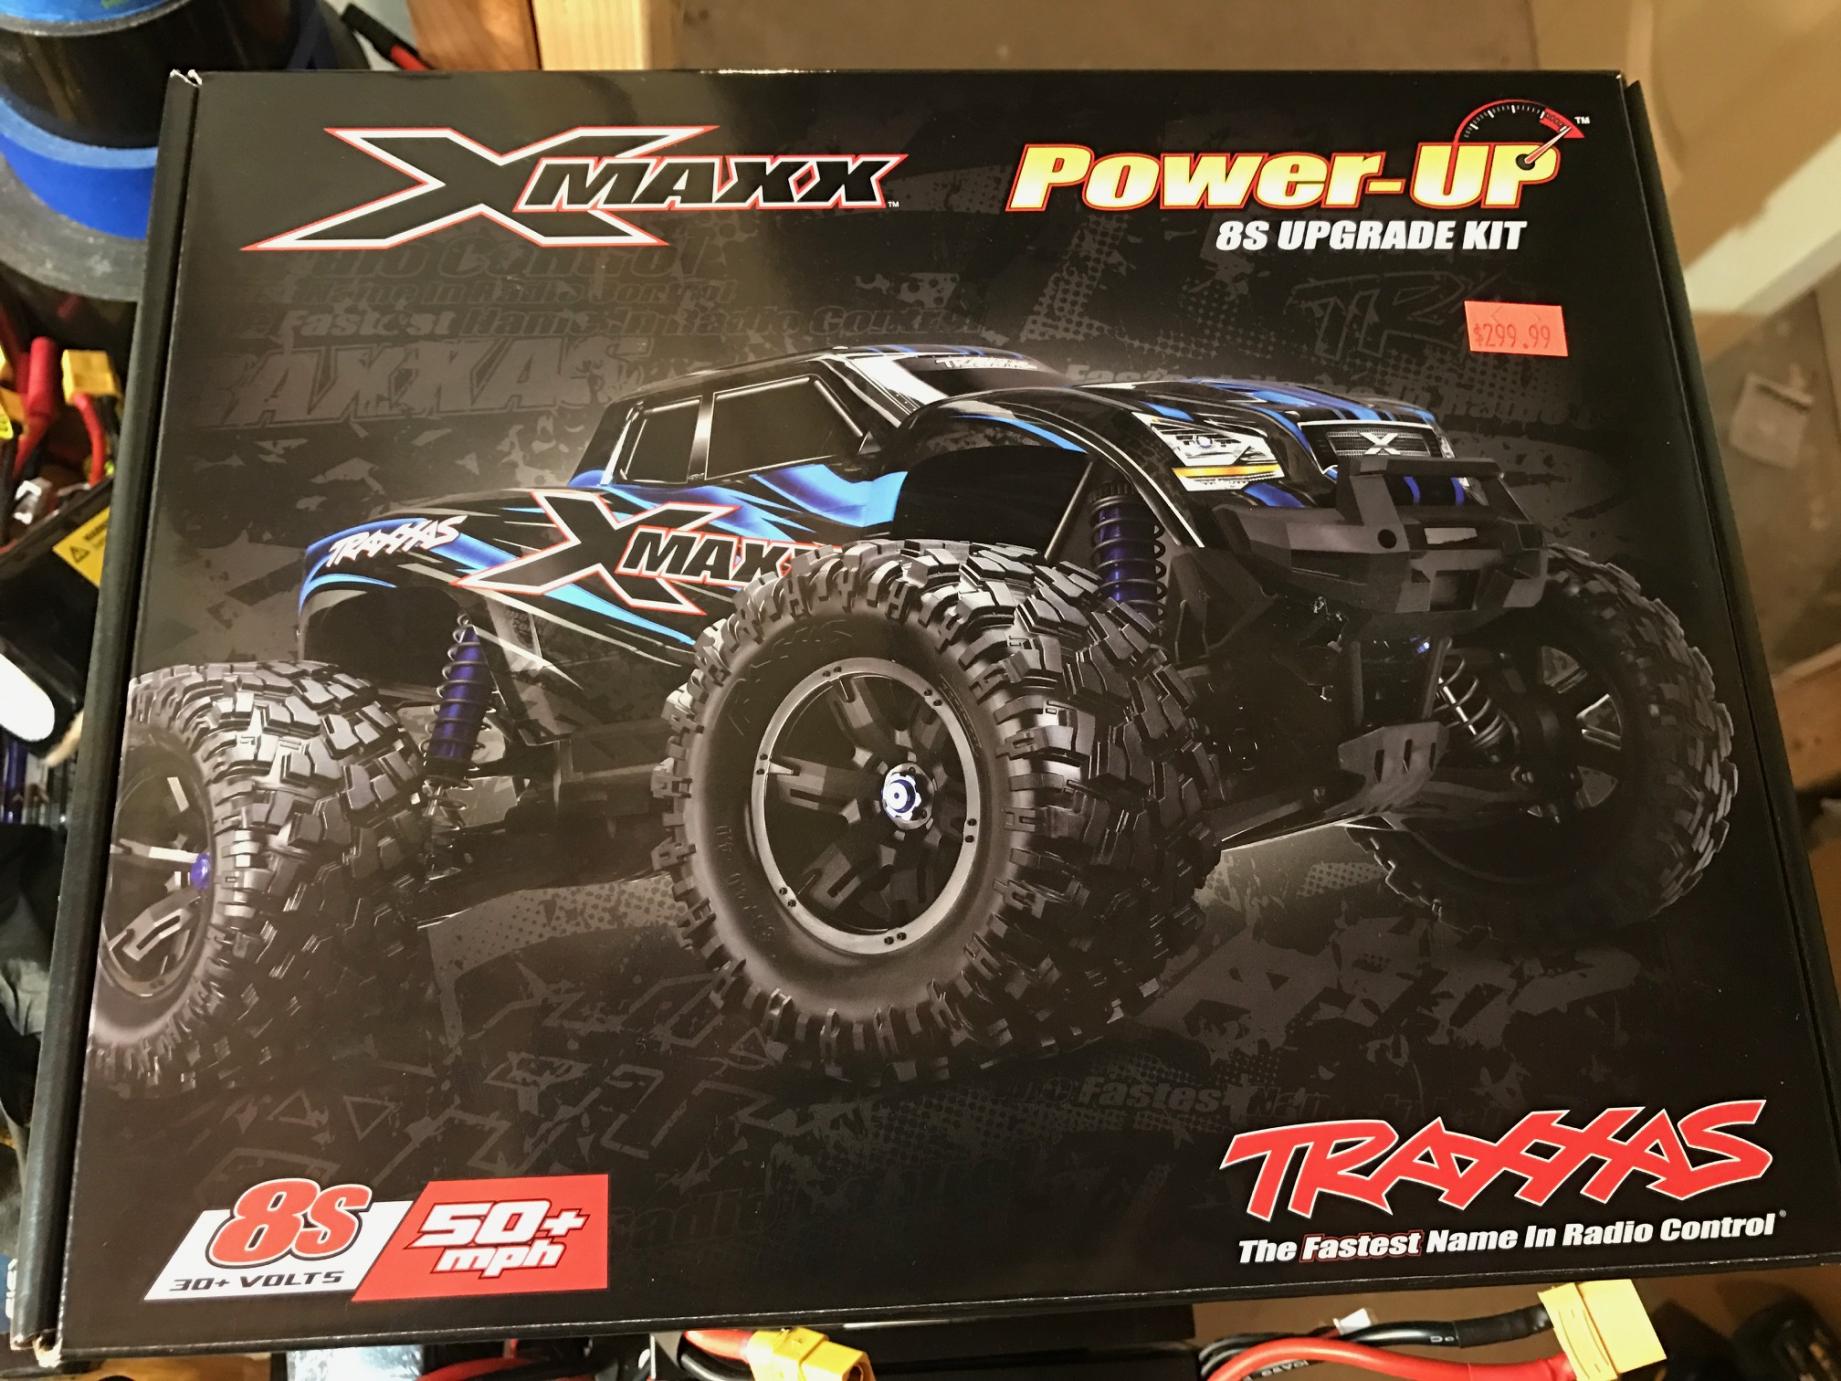 Traxxas Xmaxx 8S for $899 in Feb 2017. - Page 2 - R/C Tech Forums